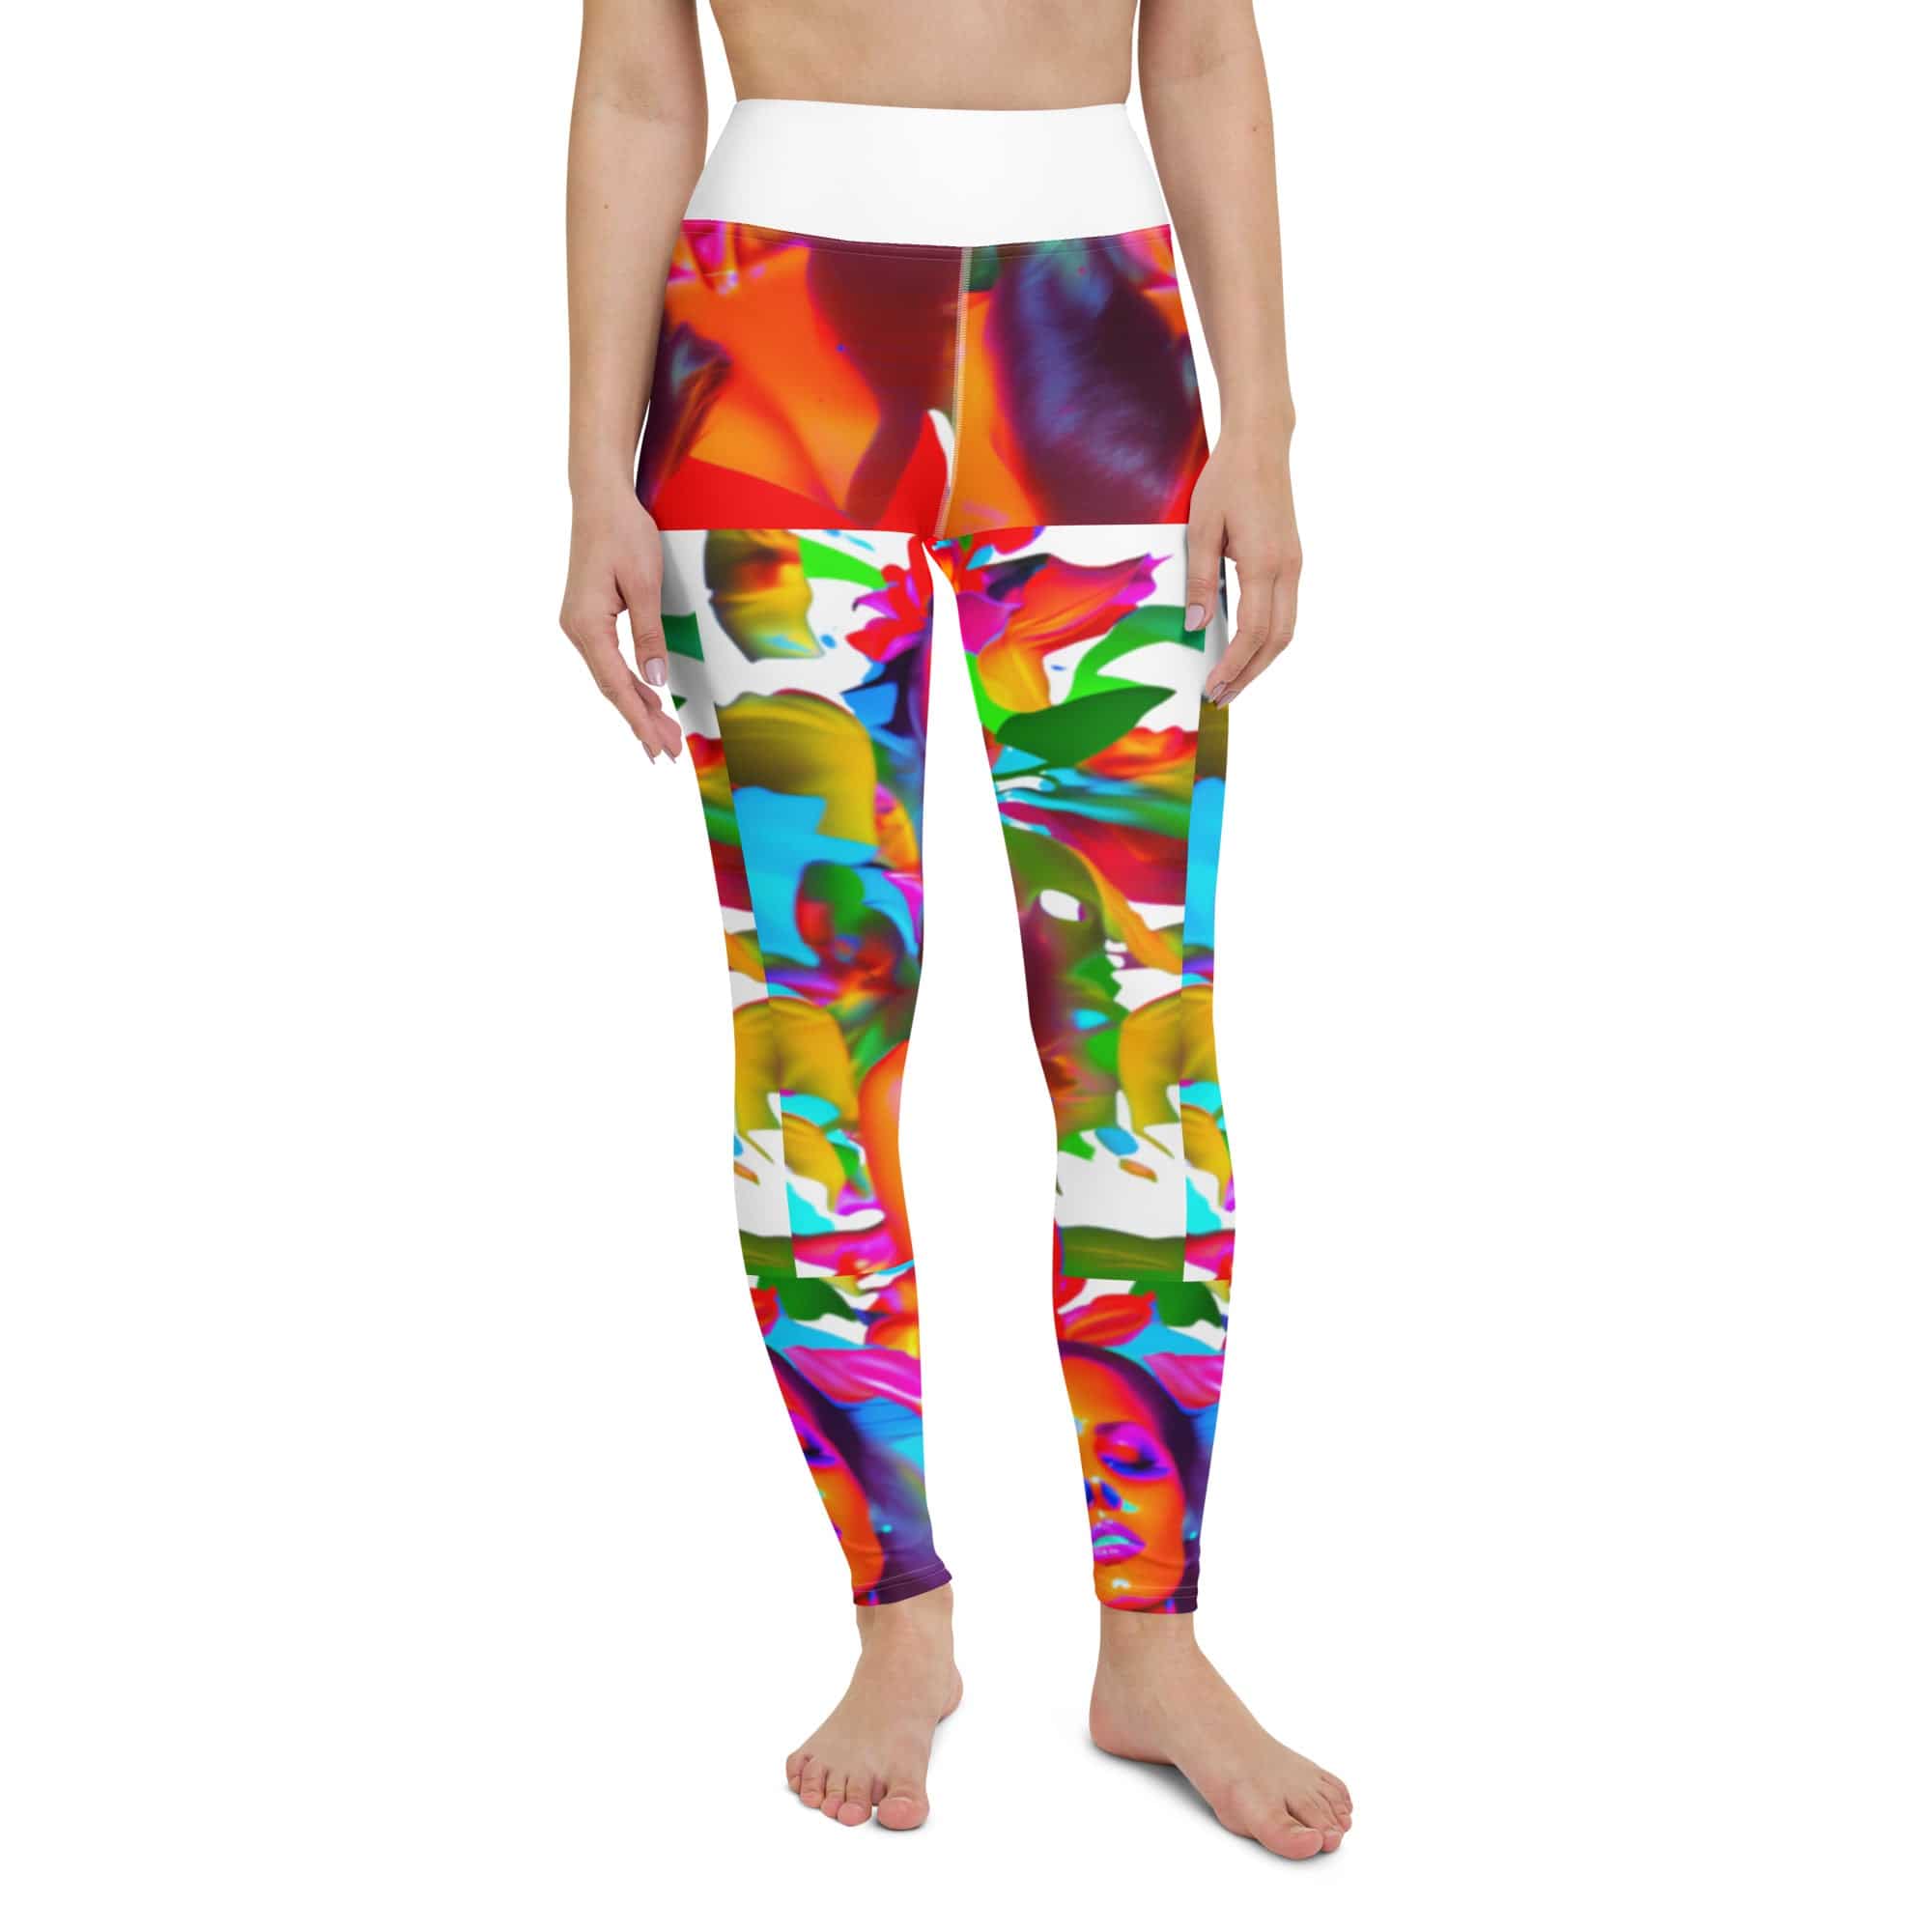 Butterfly Dreams Yoga Leggings - Take Flight into a World of Ultimate Comfort and Flattering Style - Experience the Magic of Being a Goddess. - Guy Christopher